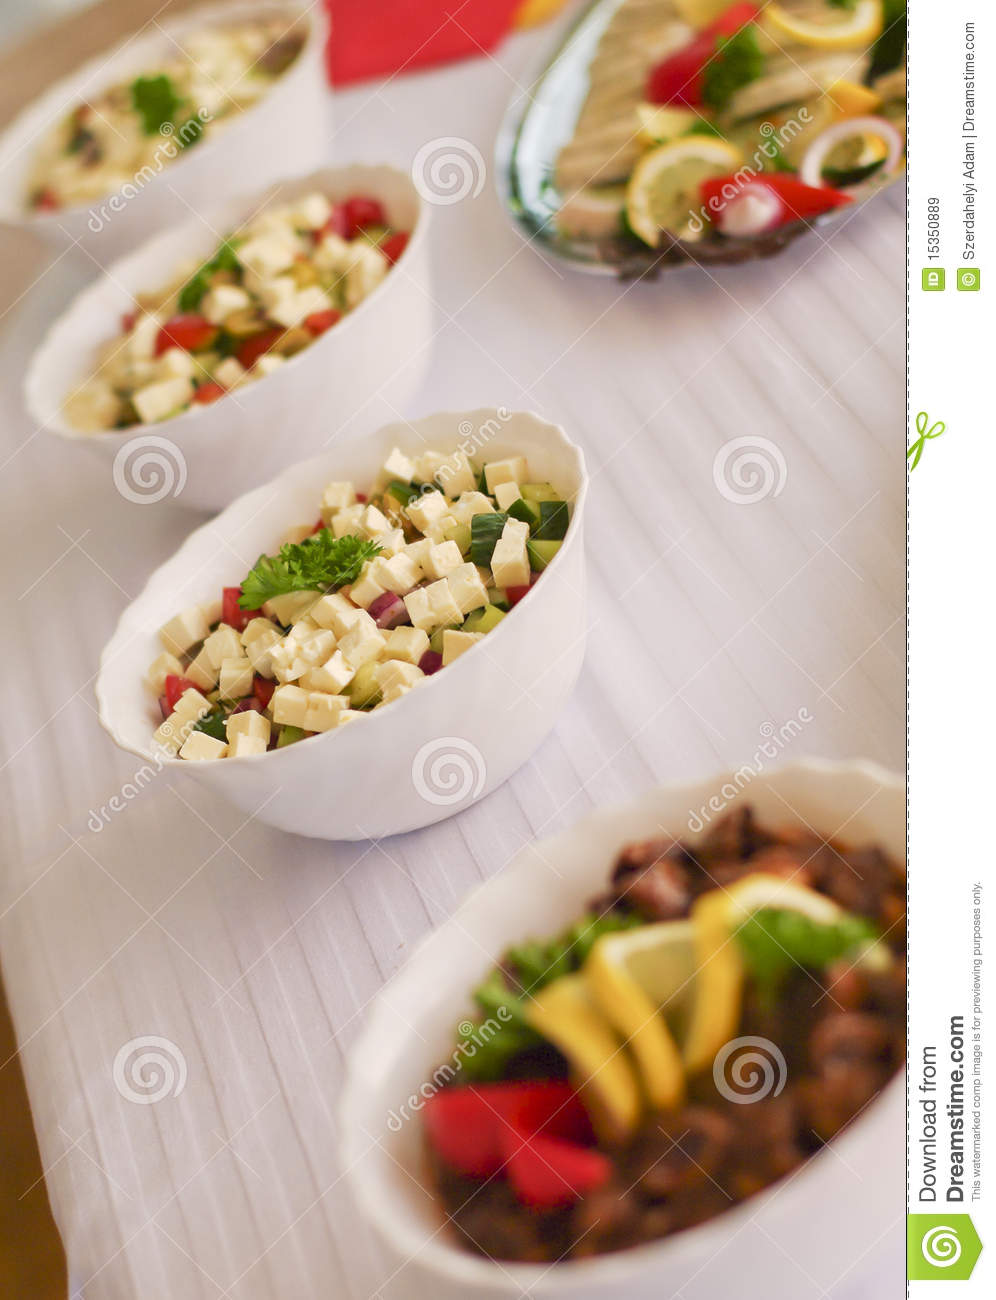 Buffet Line Royalty Free Stock Images   Image  15350889